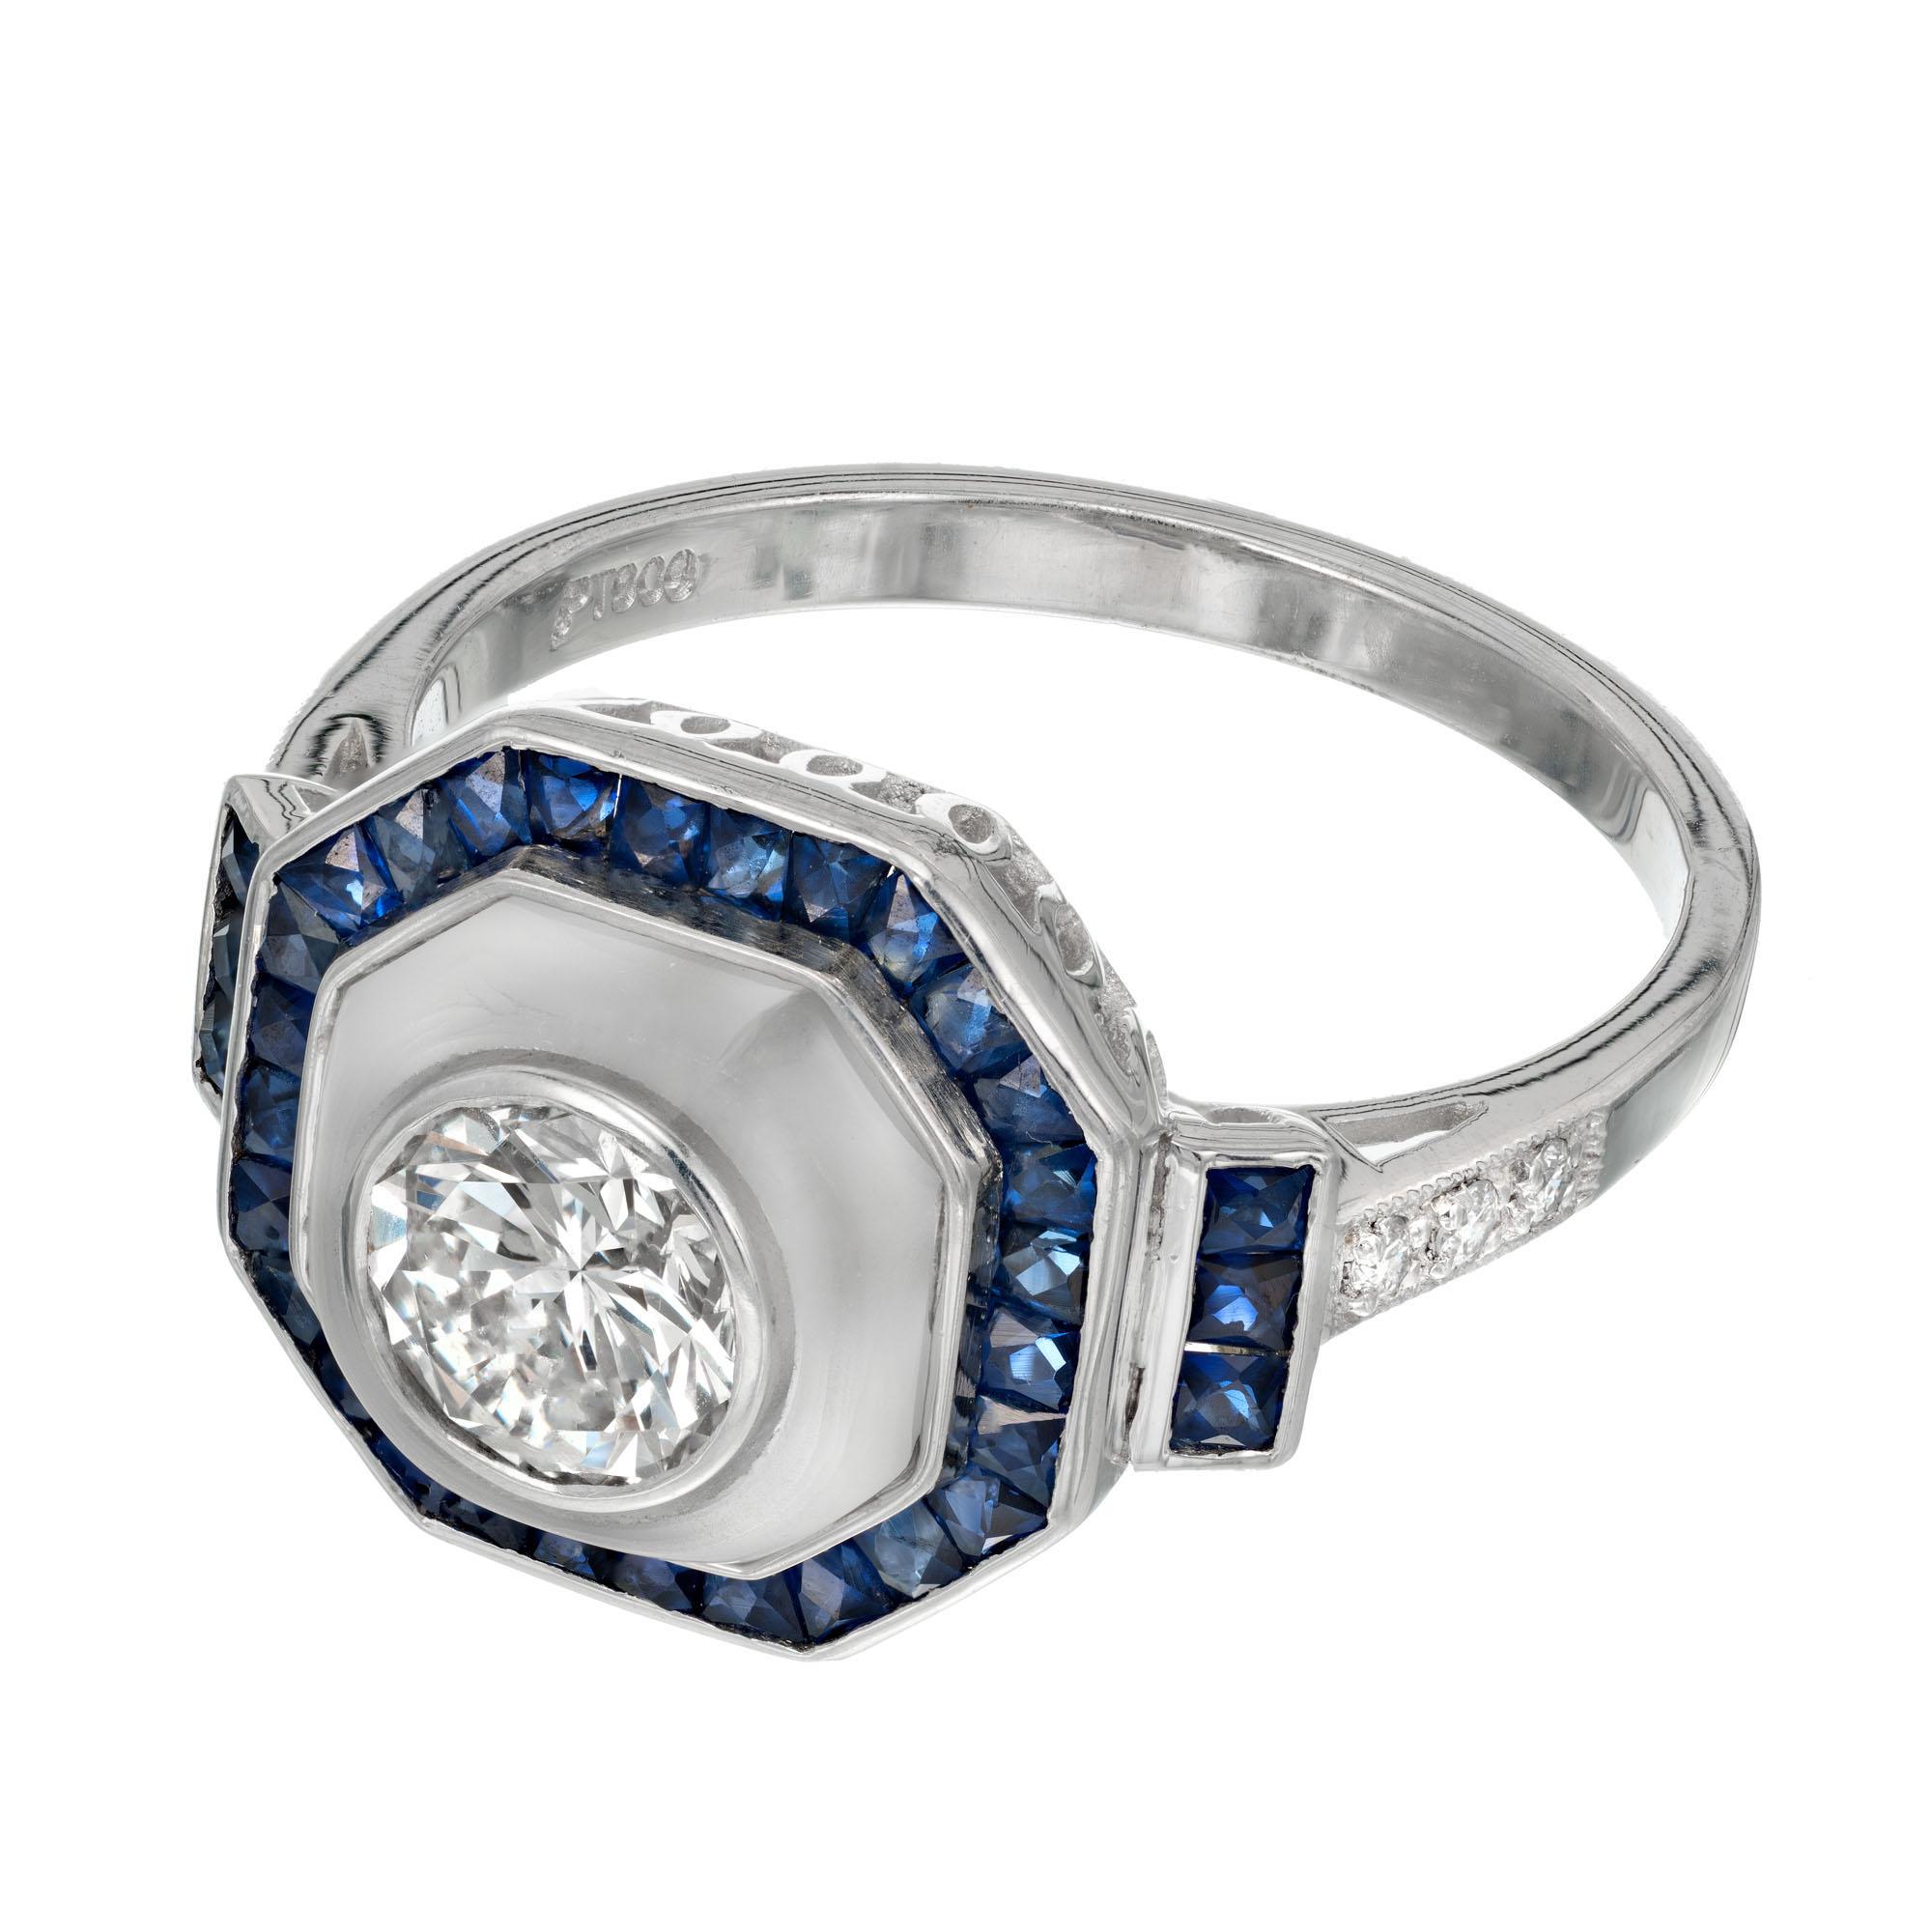 Round diamond and calibre hand cut sapphire halo engagement ring. GIA certified center diamond with Angel skin quartz center and a halo of calibre cut square sapphires in a platinum setting with diamonds along both sides of the shank. Created in the